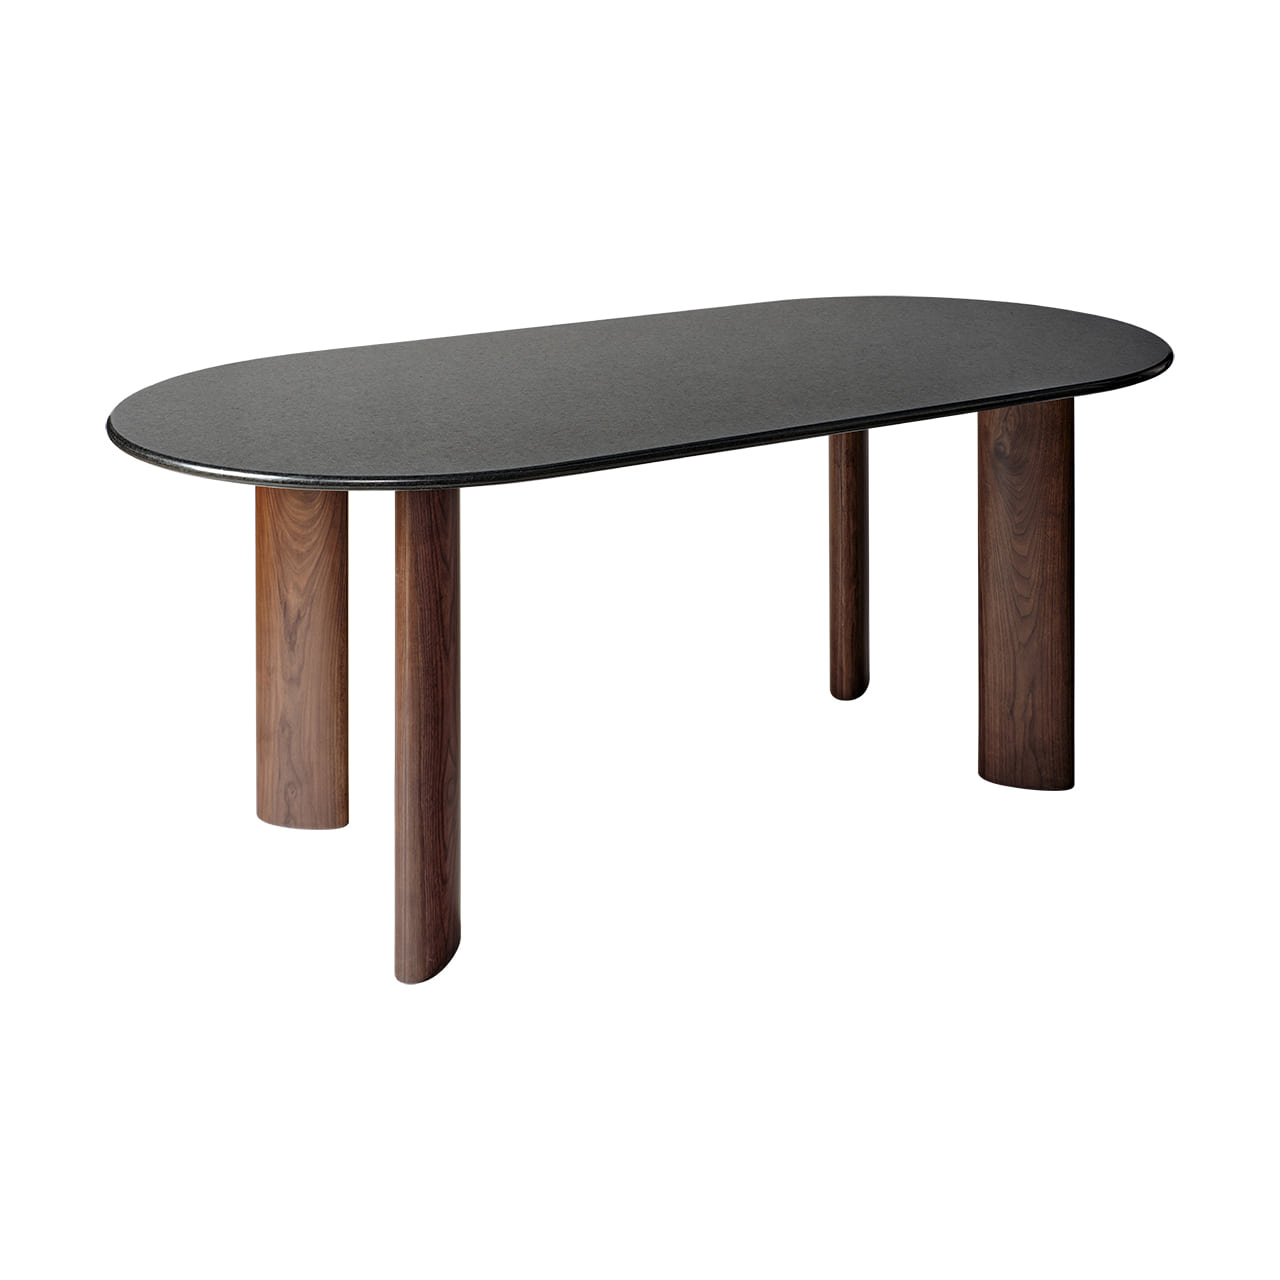 OVAL STONE DINING TABLE